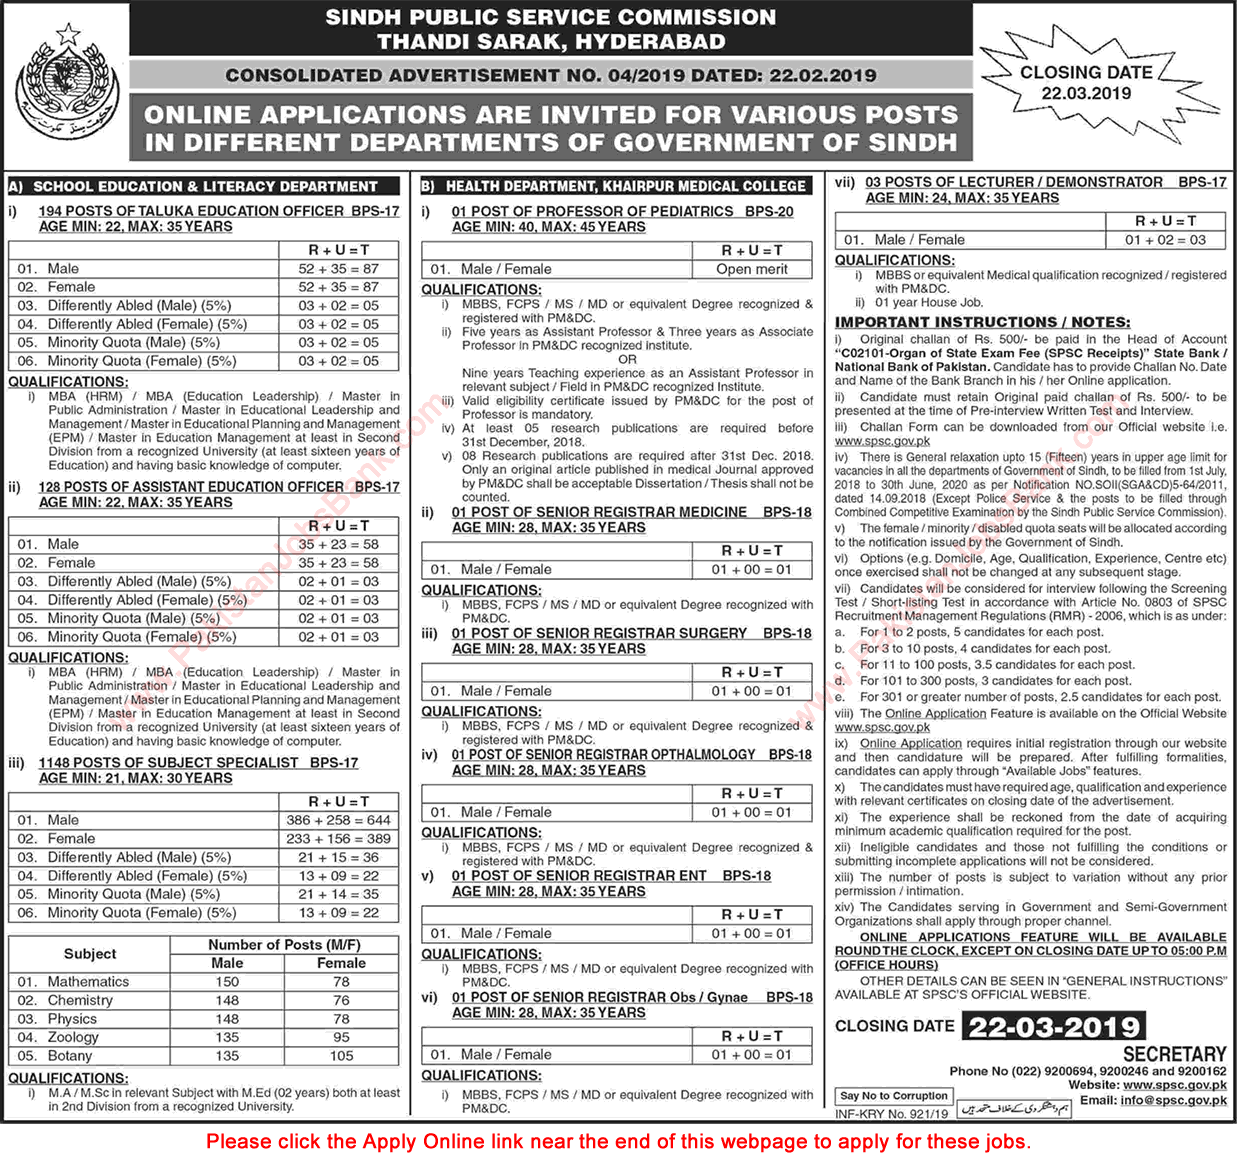 SPSC Jobs February 2019 Apply Online Consolidated Advertisement No 04/2019 4/2019 Latest